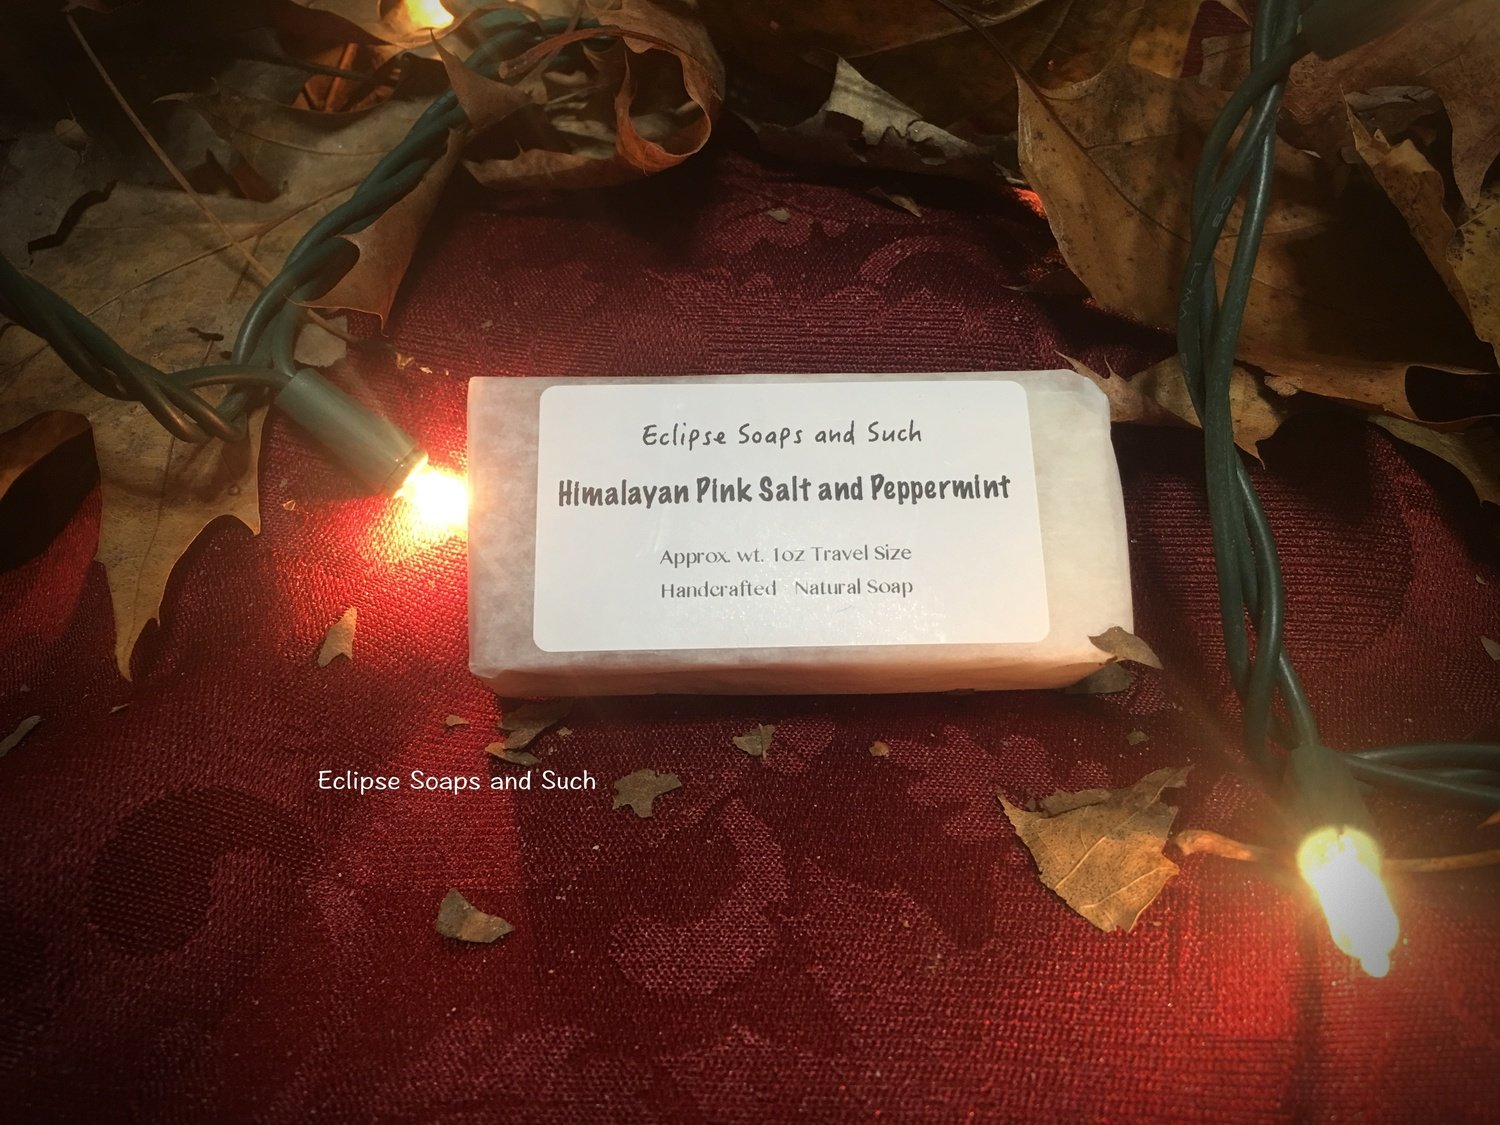 Himalayan Pink Salt and Peppermint 1oz Travel Soap